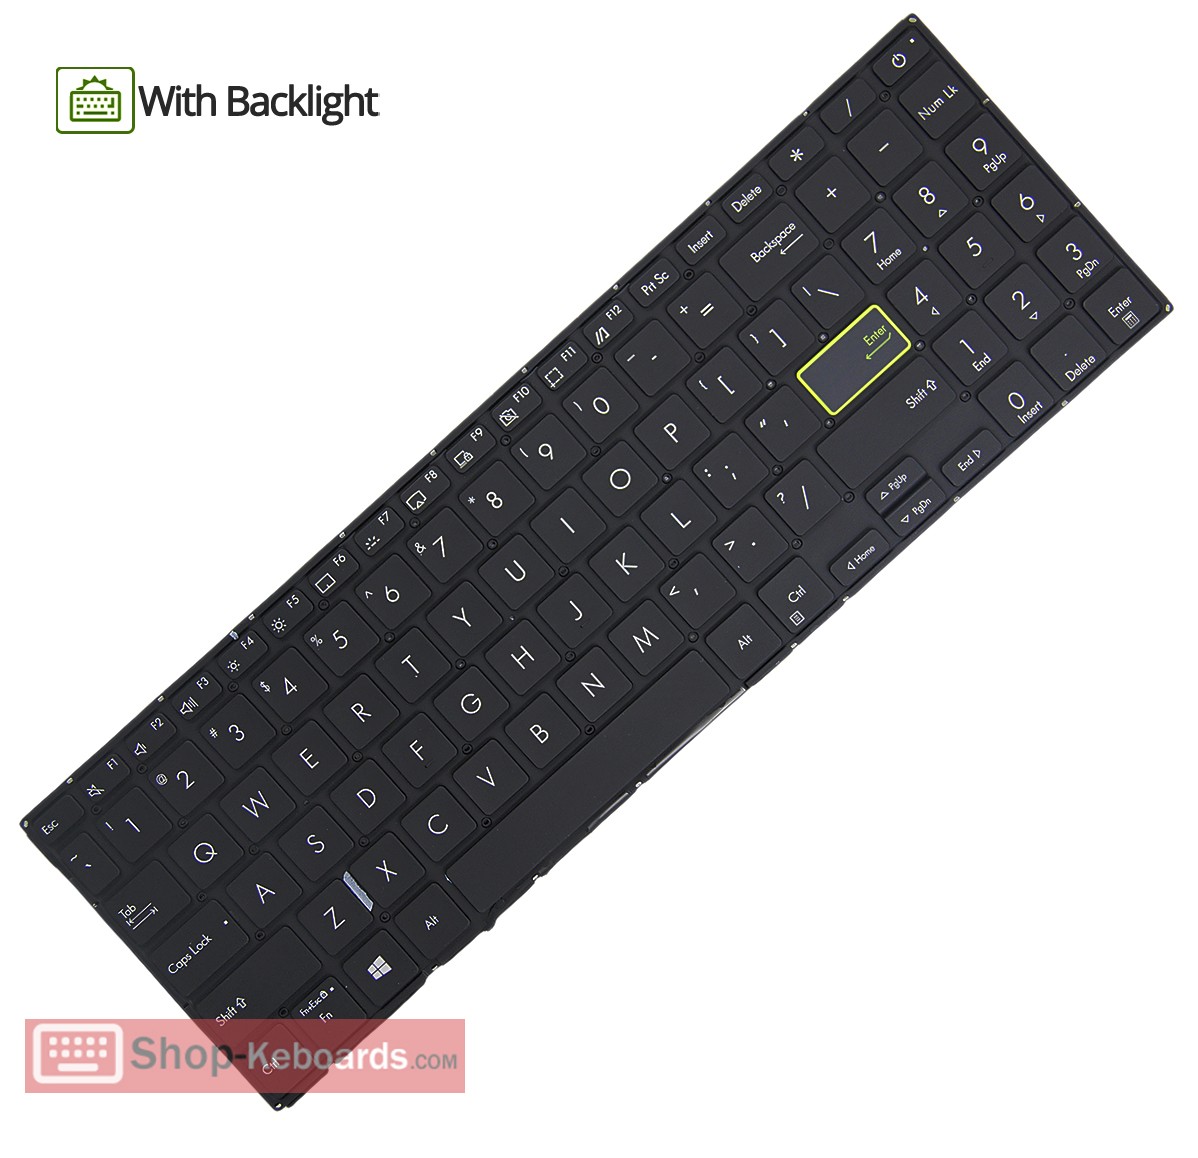 Asus 0KNB0-560GUS00 Keyboard replacement